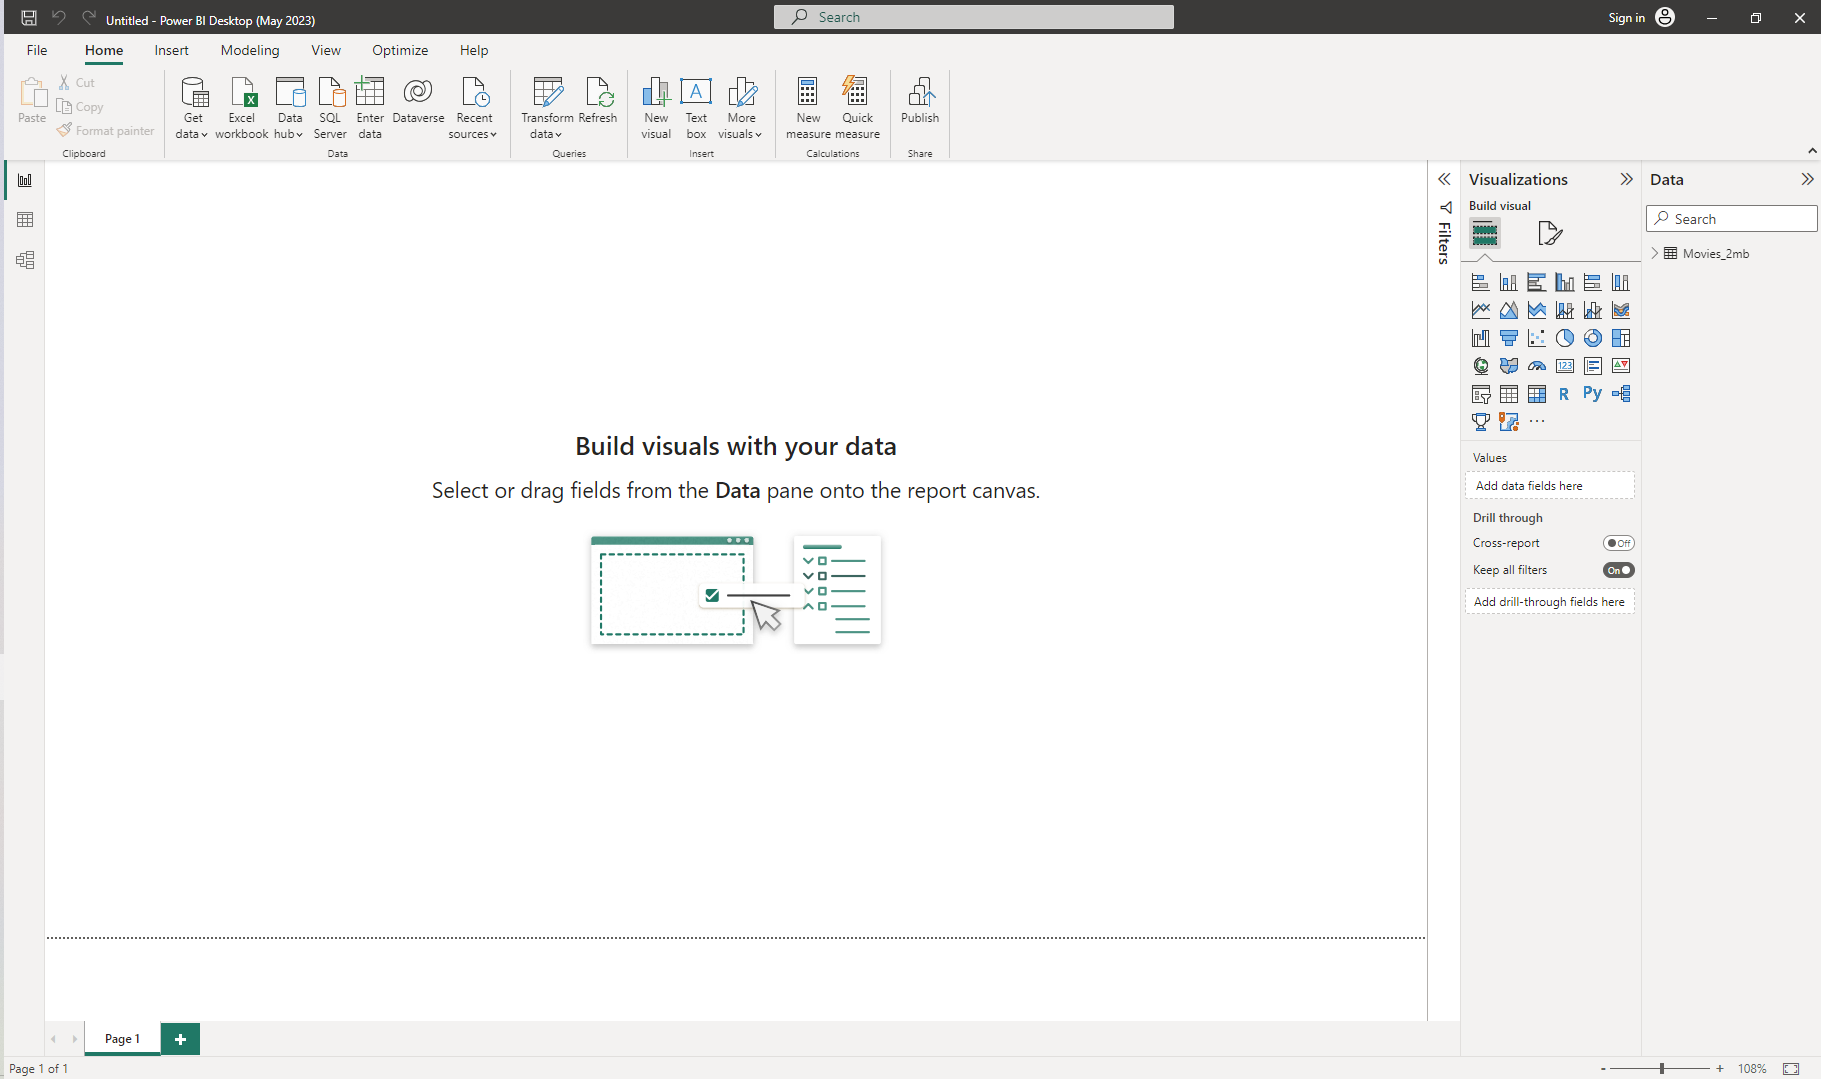 The Microsoft Power BI application’s interface, post data import, ready for JSON data visualization and analysis.